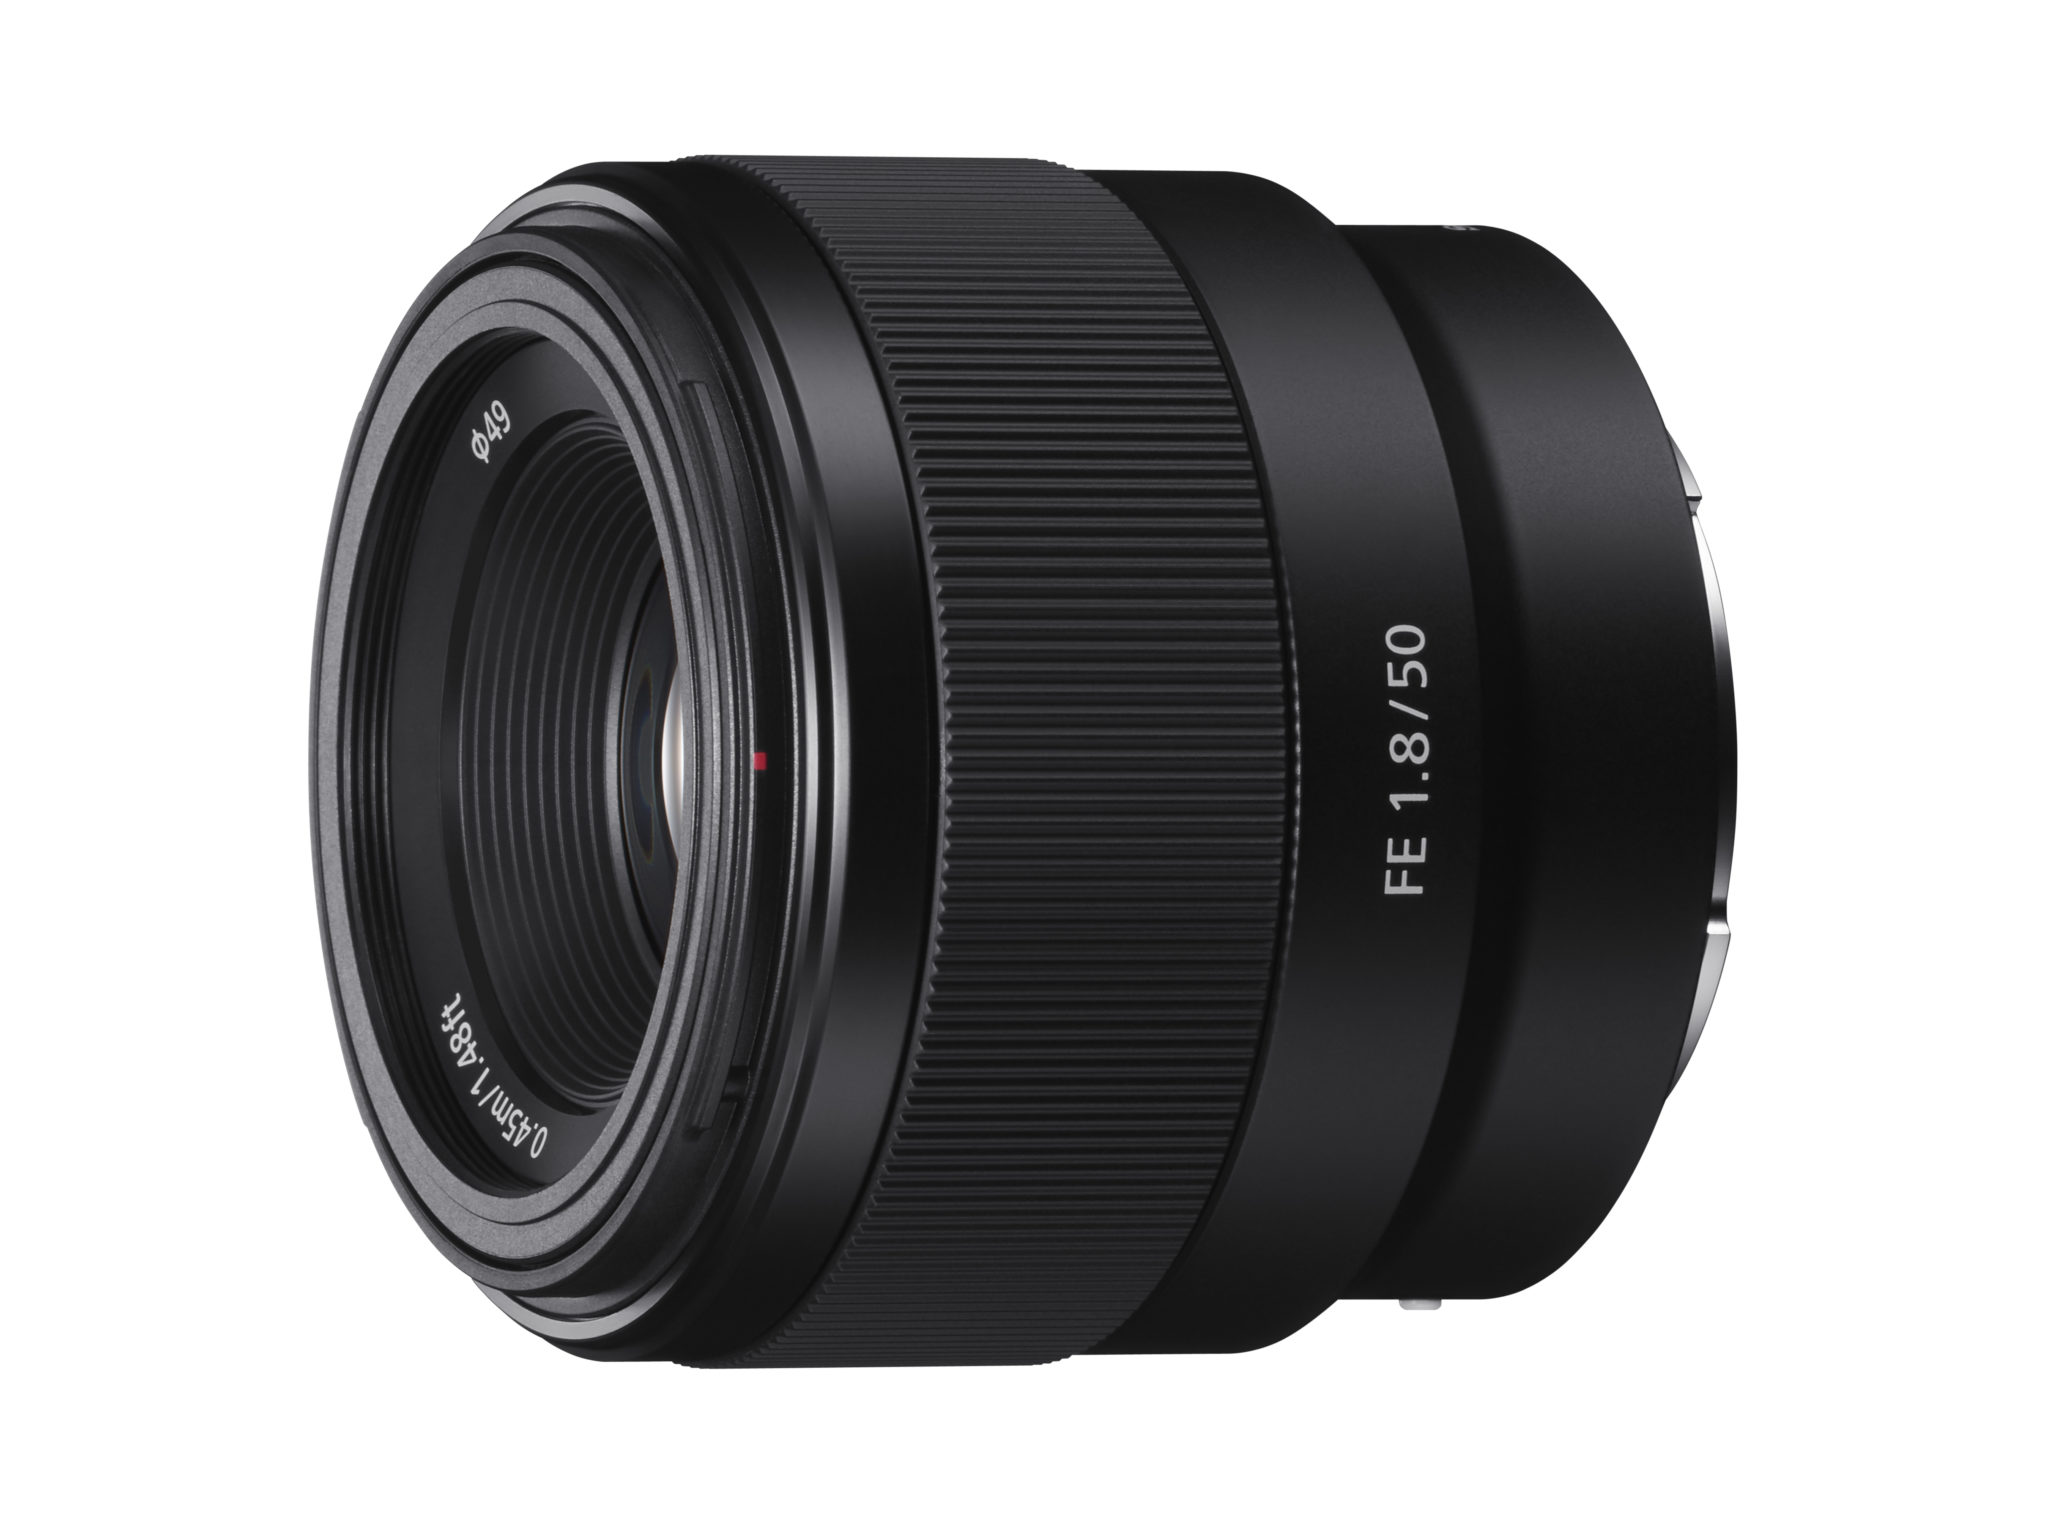 Sony Announces New 50mm f1.8 Lens for a7 Series of Cameras